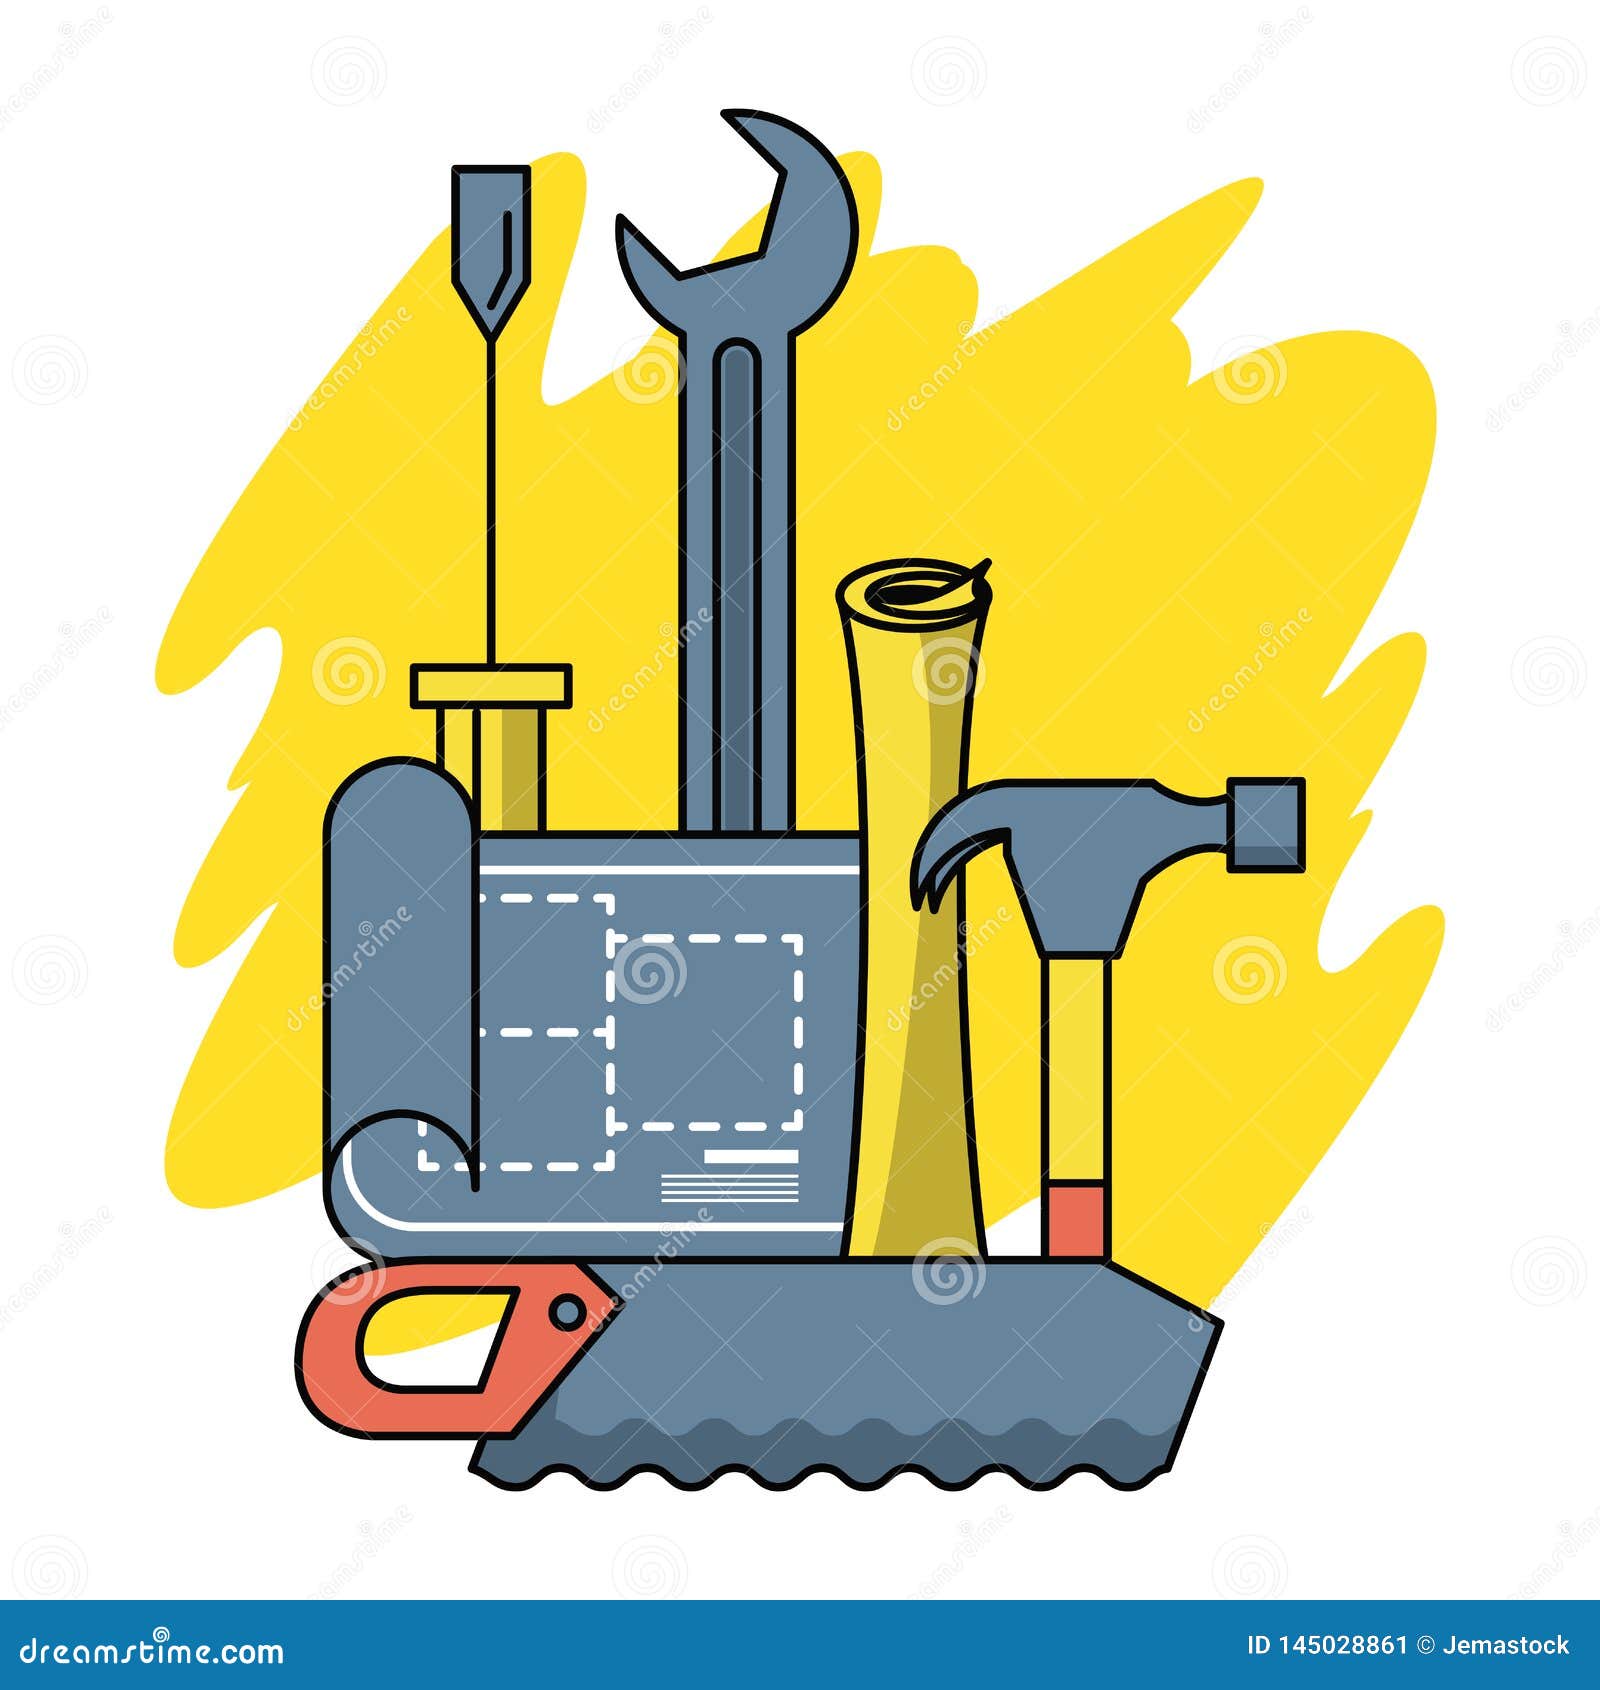 Home improvement and tools stock vector. Illustration of adult - 145028861